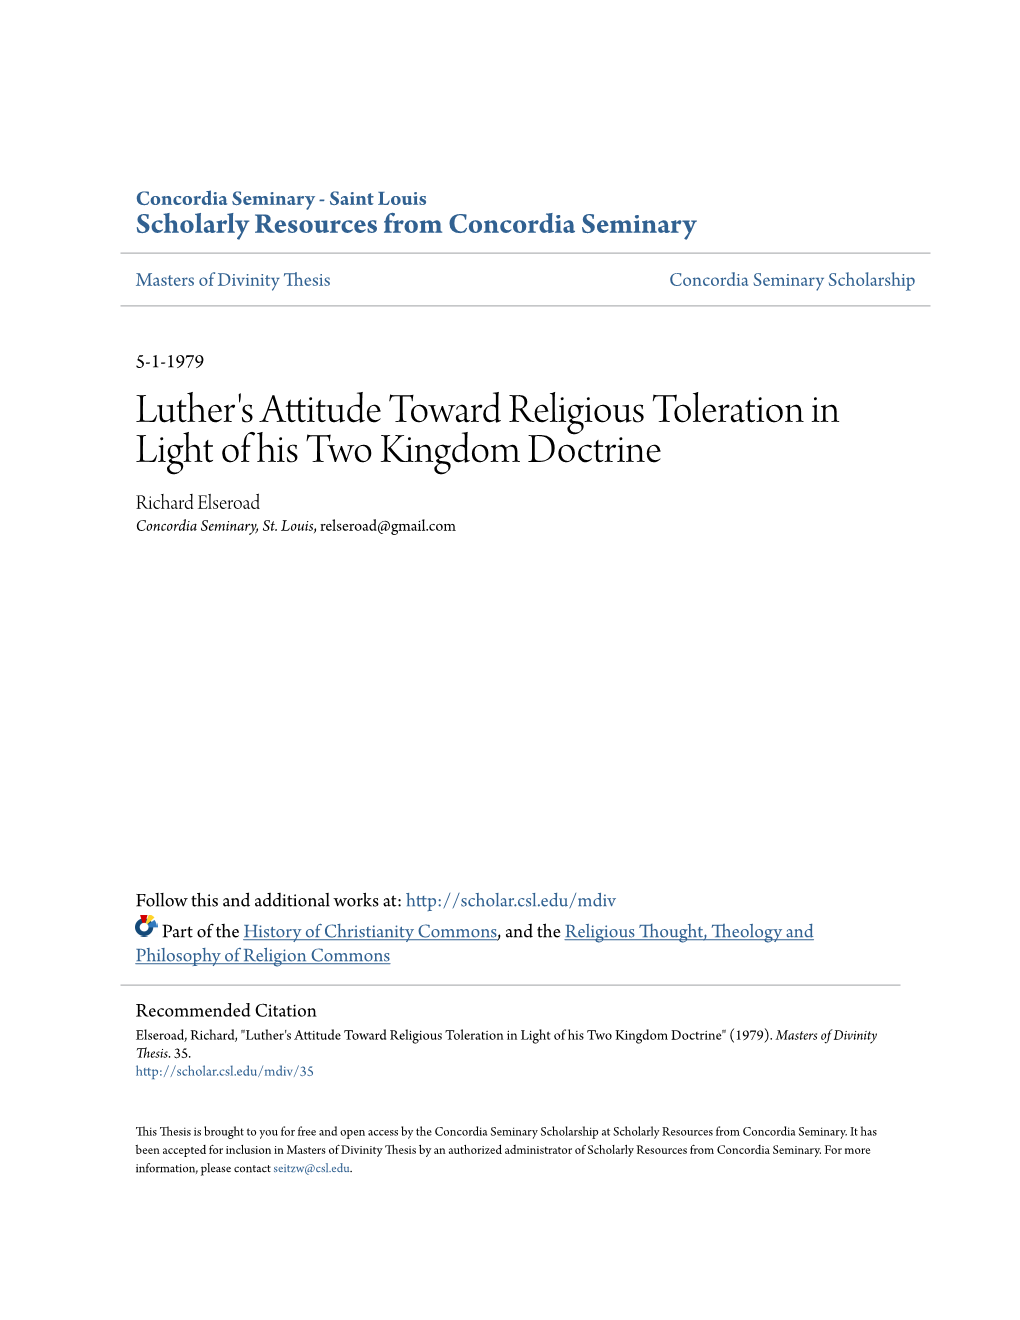 Luther's Attitude Toward Religious Toleration in Light of His Two Kingdom Doctrine Richard Elseroad Concordia Seminary, St